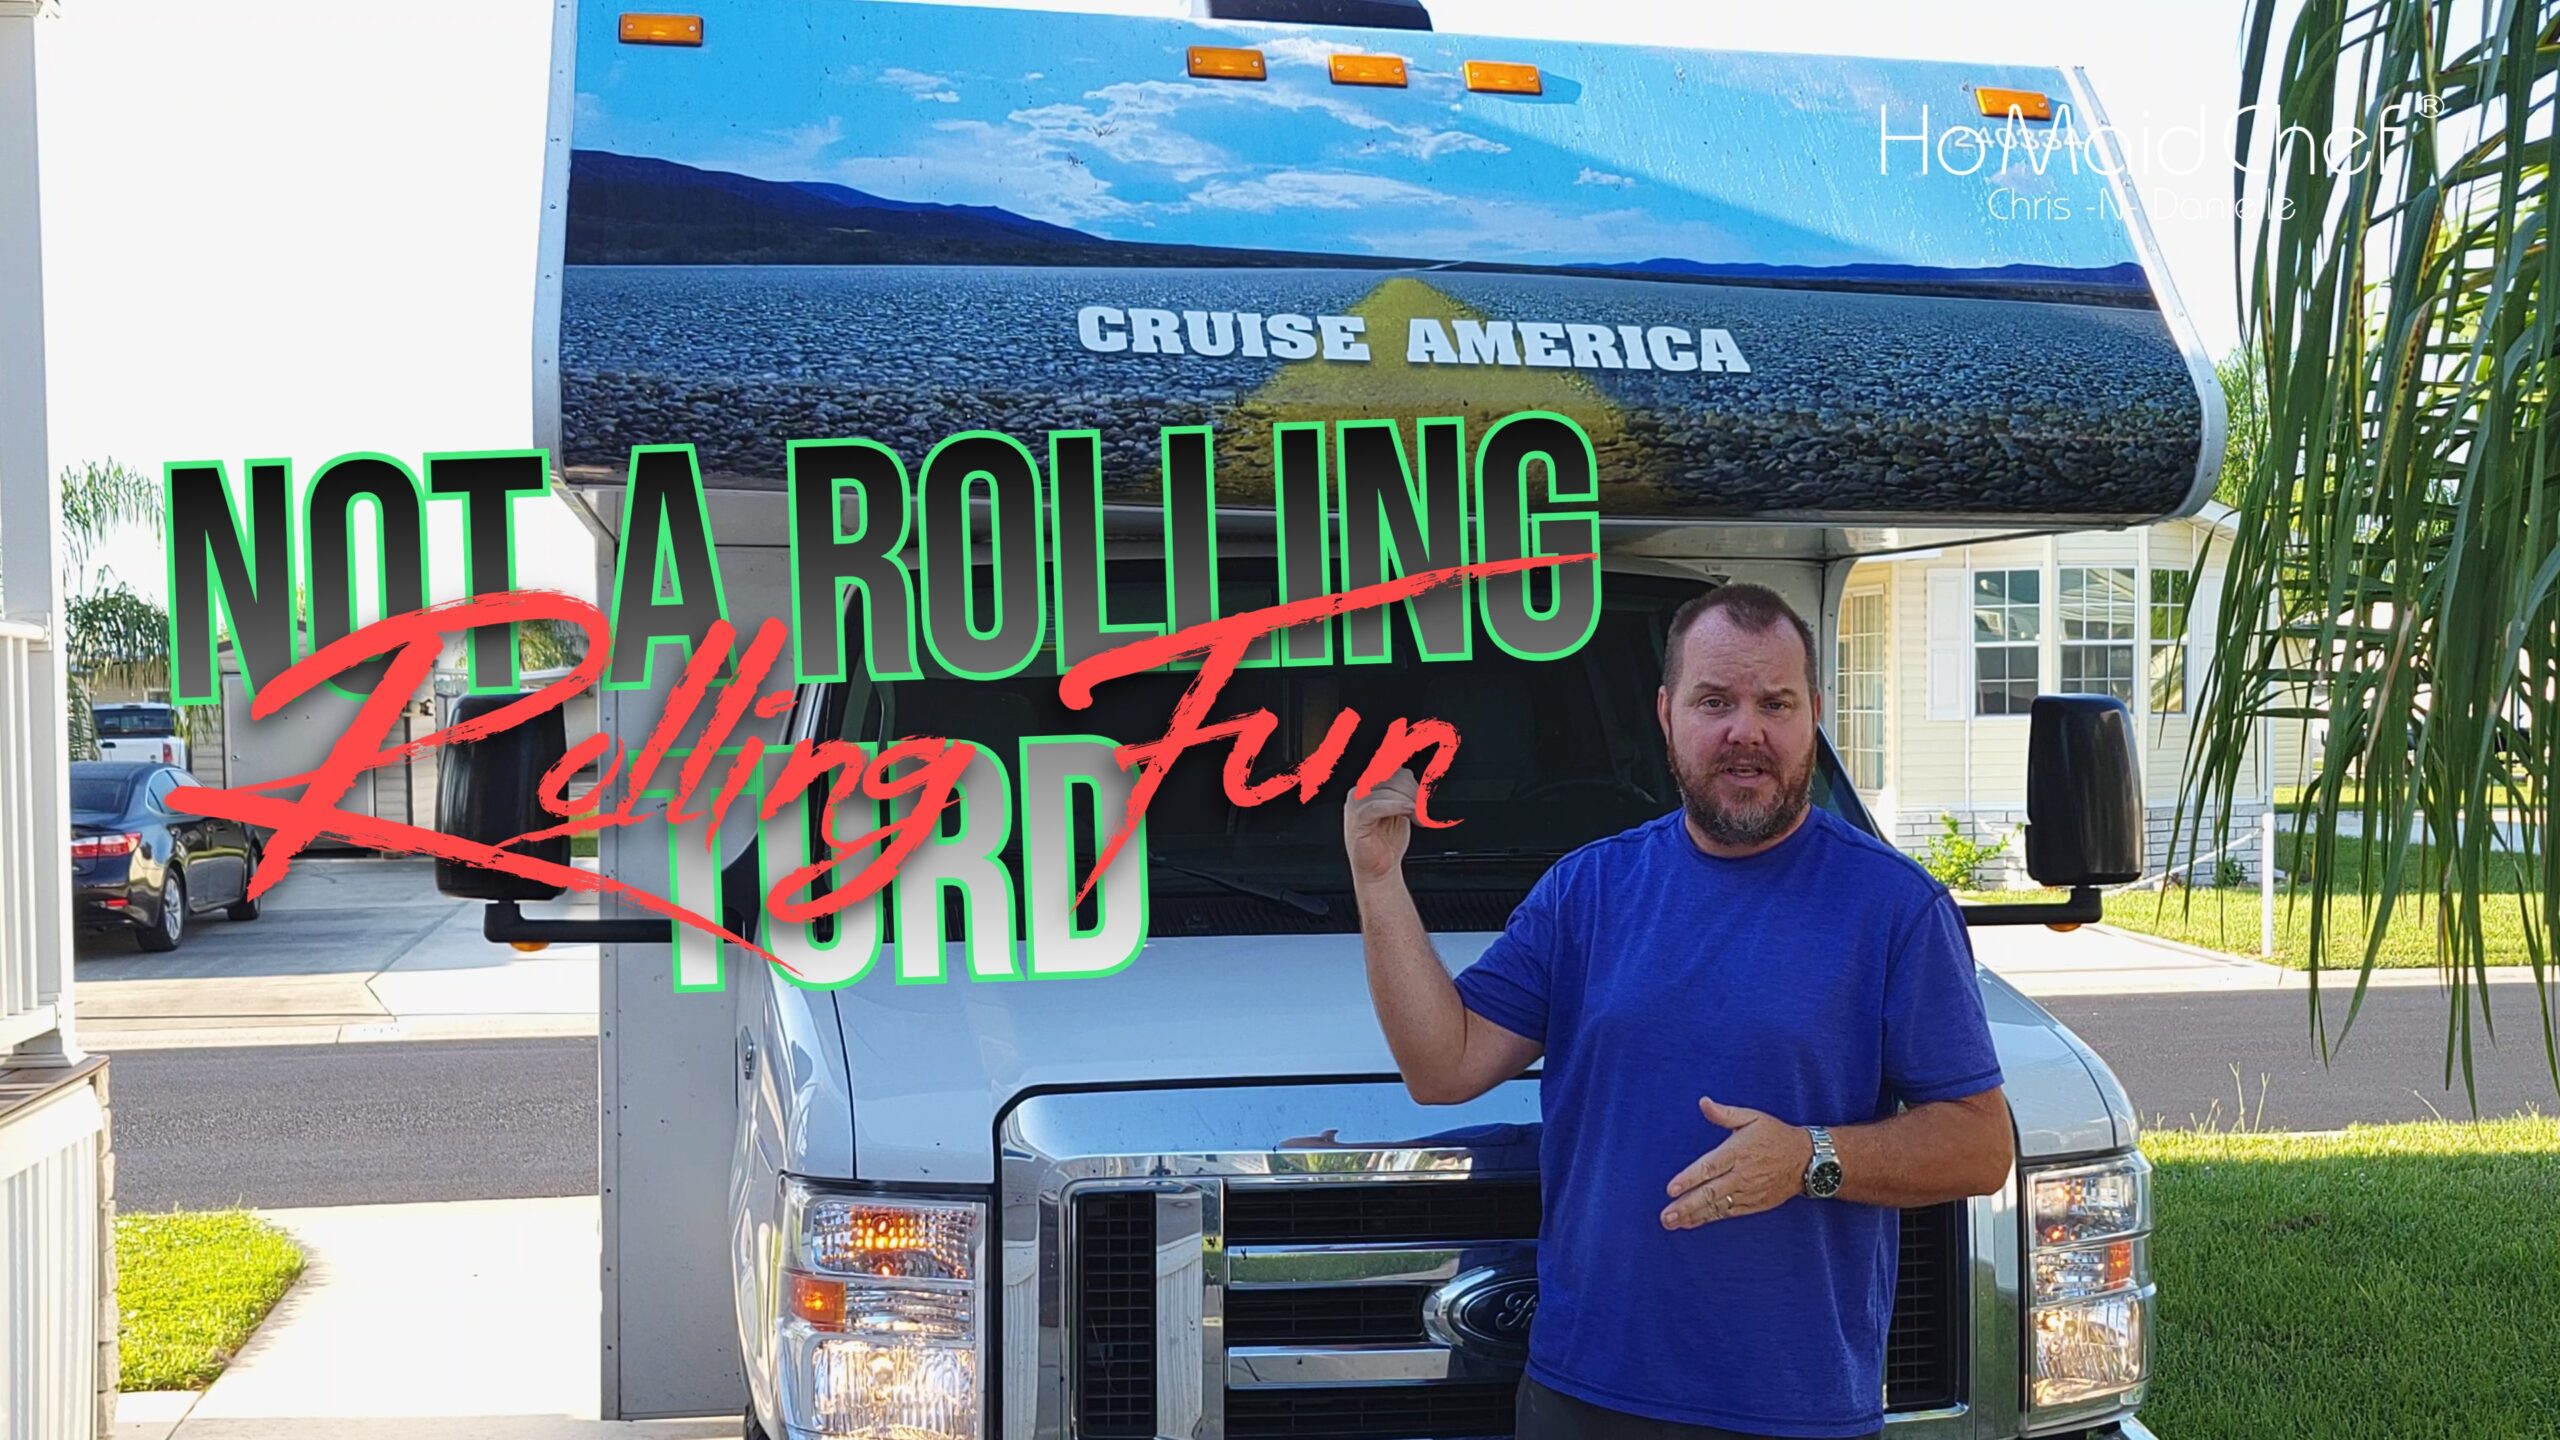 See Our Cruise America Rv Review For An Inside Look At This Popular Rv Rental Company!